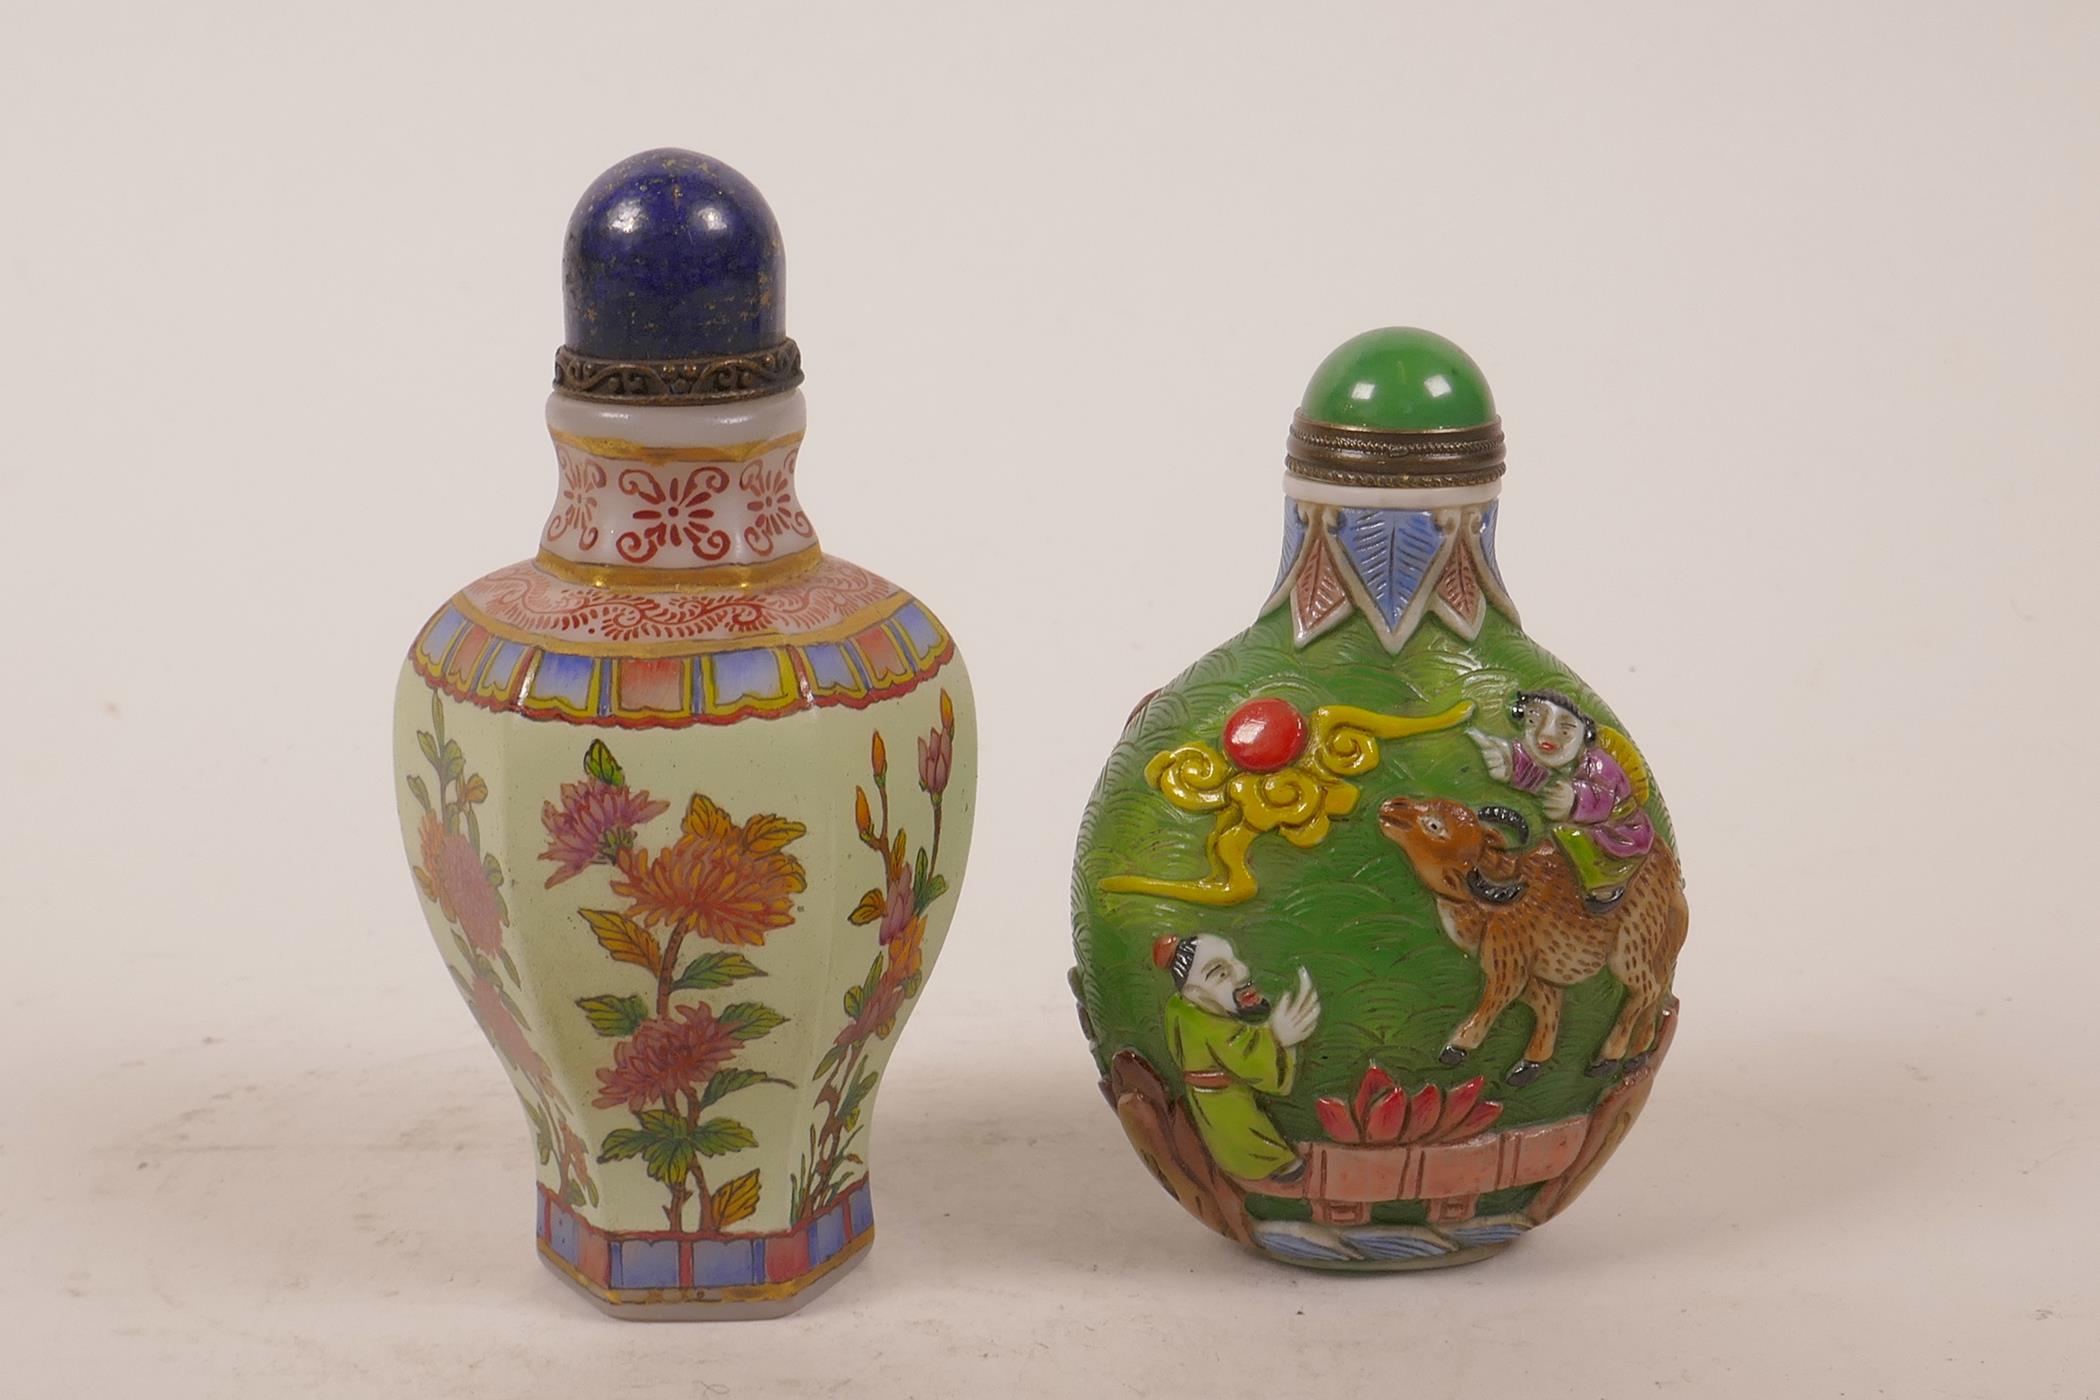 A Chinese enamelled glass snuff bottle decorated with flowers, together with another glass snuff